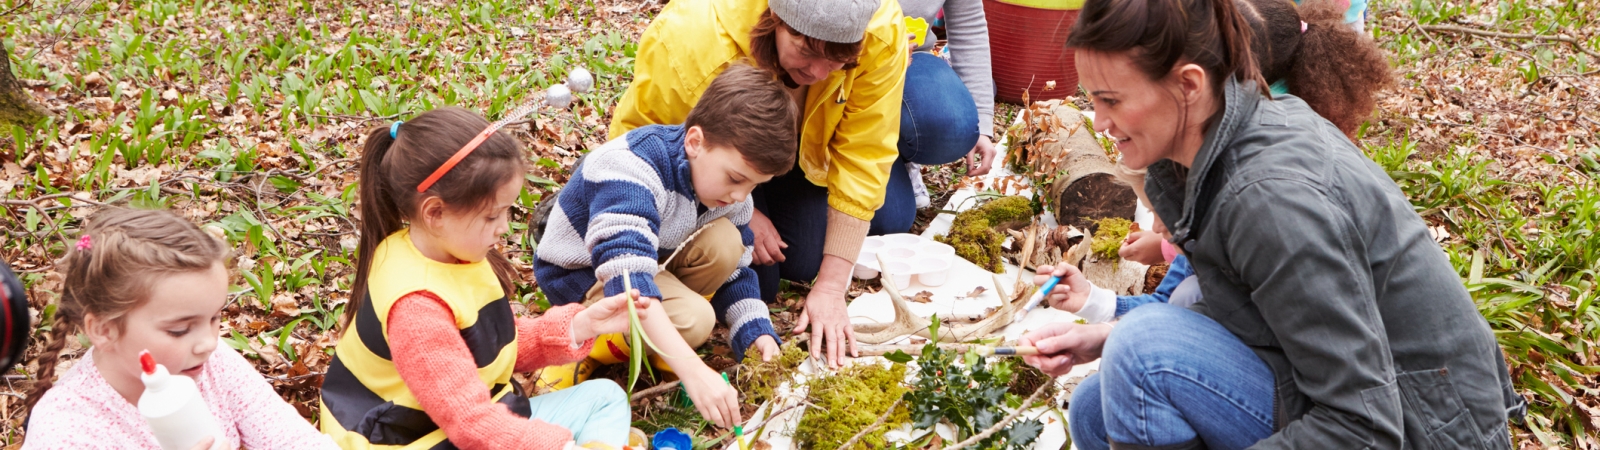 	Group of kids and adults sitting in forest doing crafts with sticks and leaves